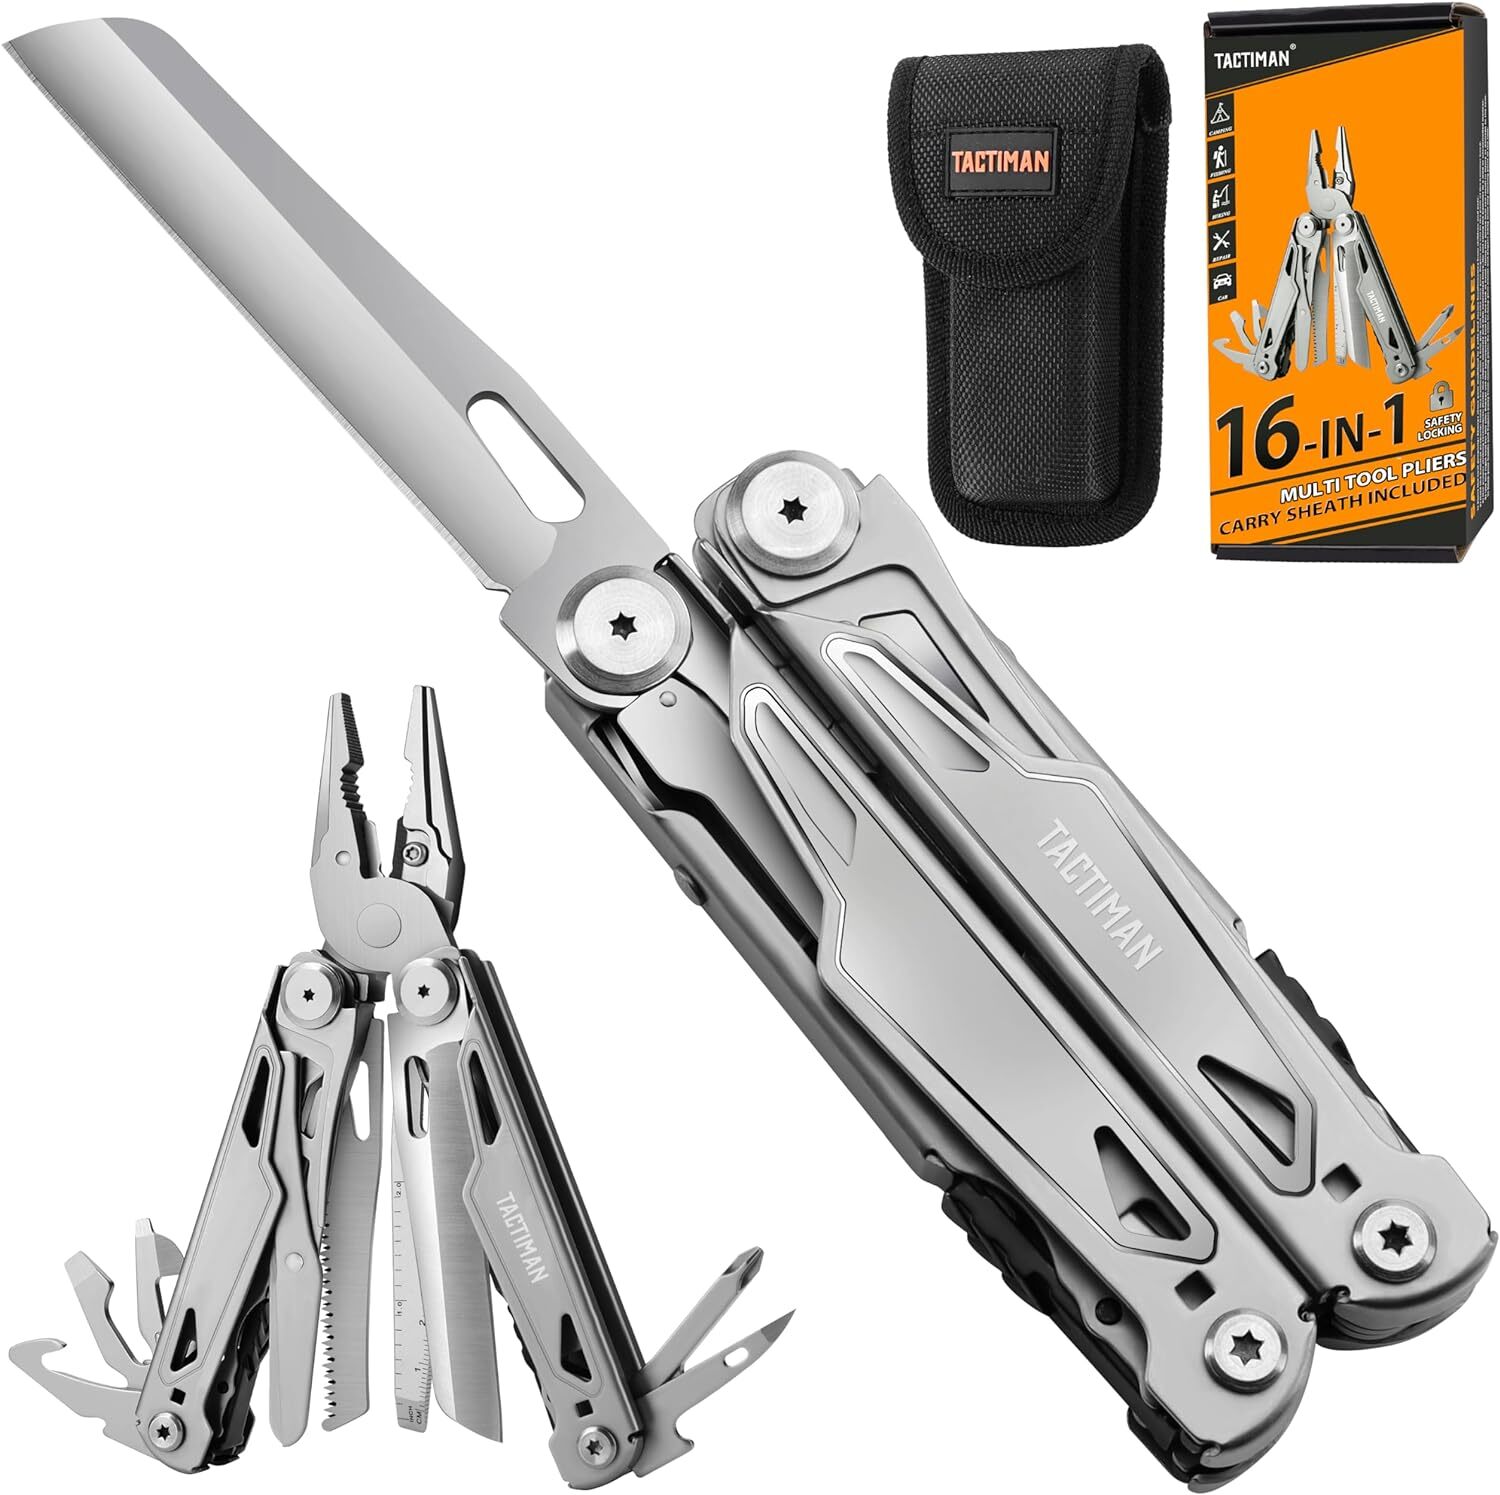 TACTIMAN 15-in-1 Multi Tool Pocket Knife, Tactical Multitool Knife Pliers,  Camping Survival Gear with Knife Saw Scissors Serrated Blade Bottle Can  Opener Screwdrivers Safety Lock, Unique Gifts for Men